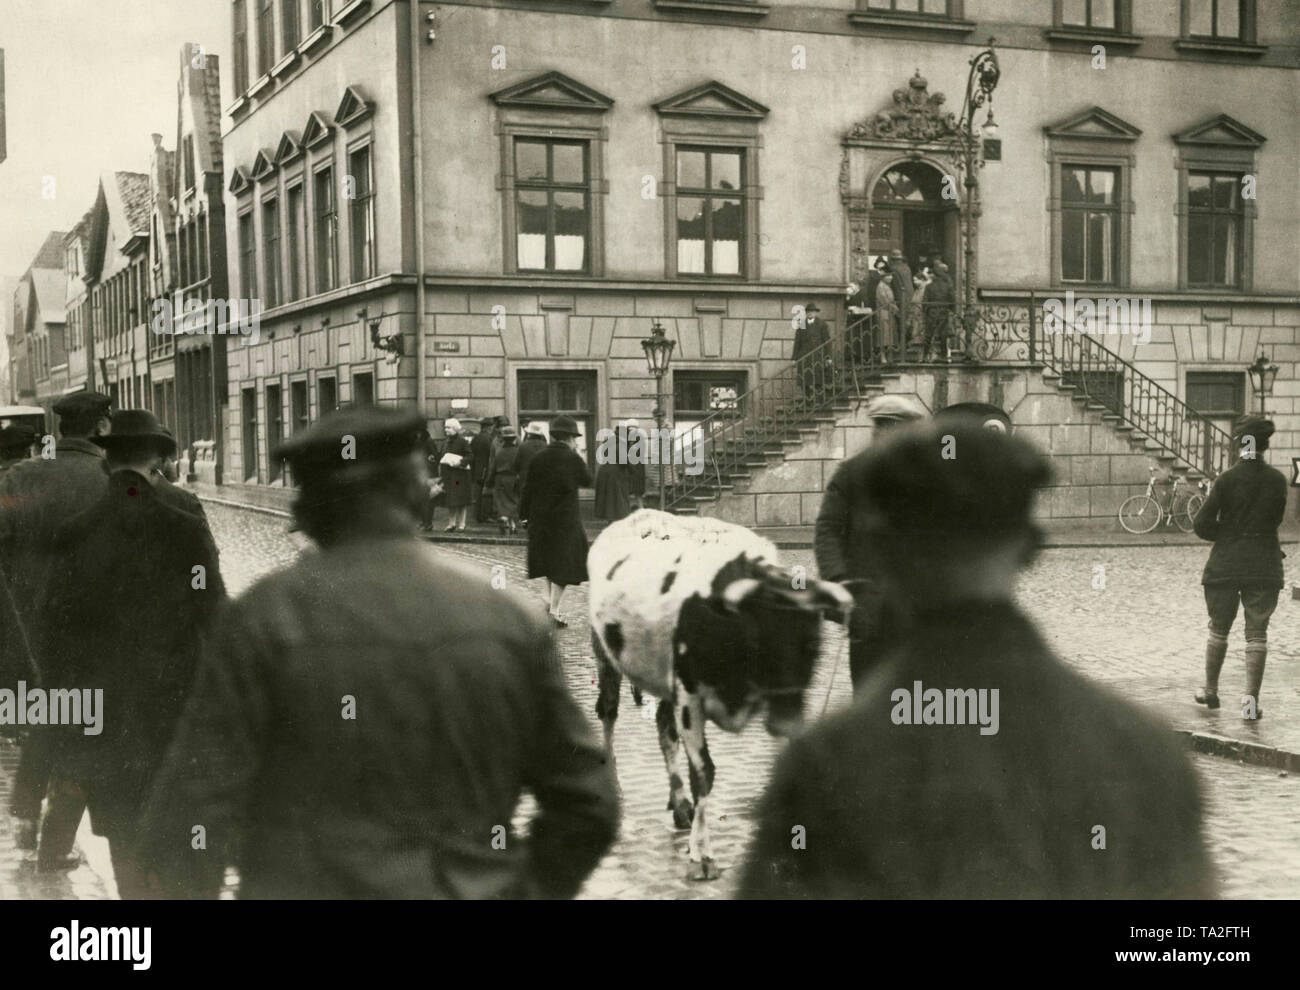 This photograph shows a freed ox in front of the magistrate's court, as his owner has released it trying to avoid its seizure and thus committed breach of attachment. Stock Photo